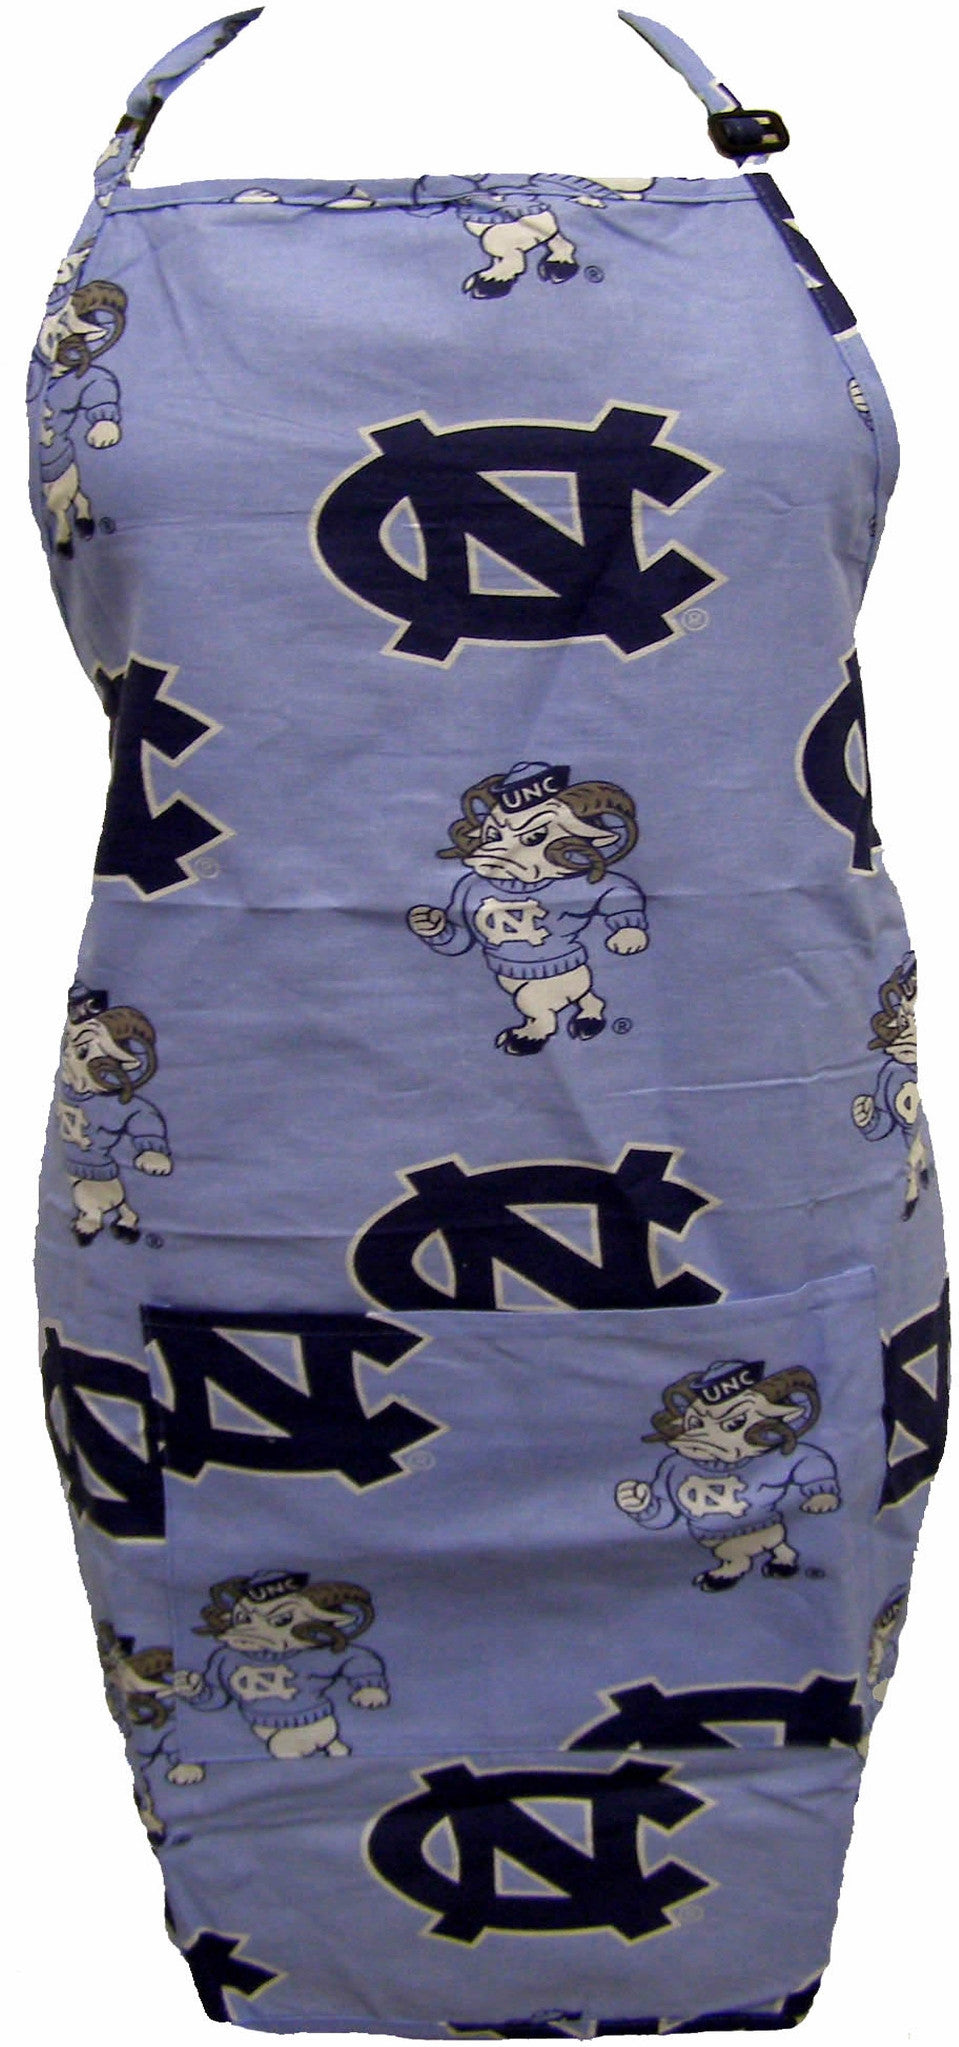 Unc Apron 26"x35" With 9" Pocket - Ncuapr By College Covers